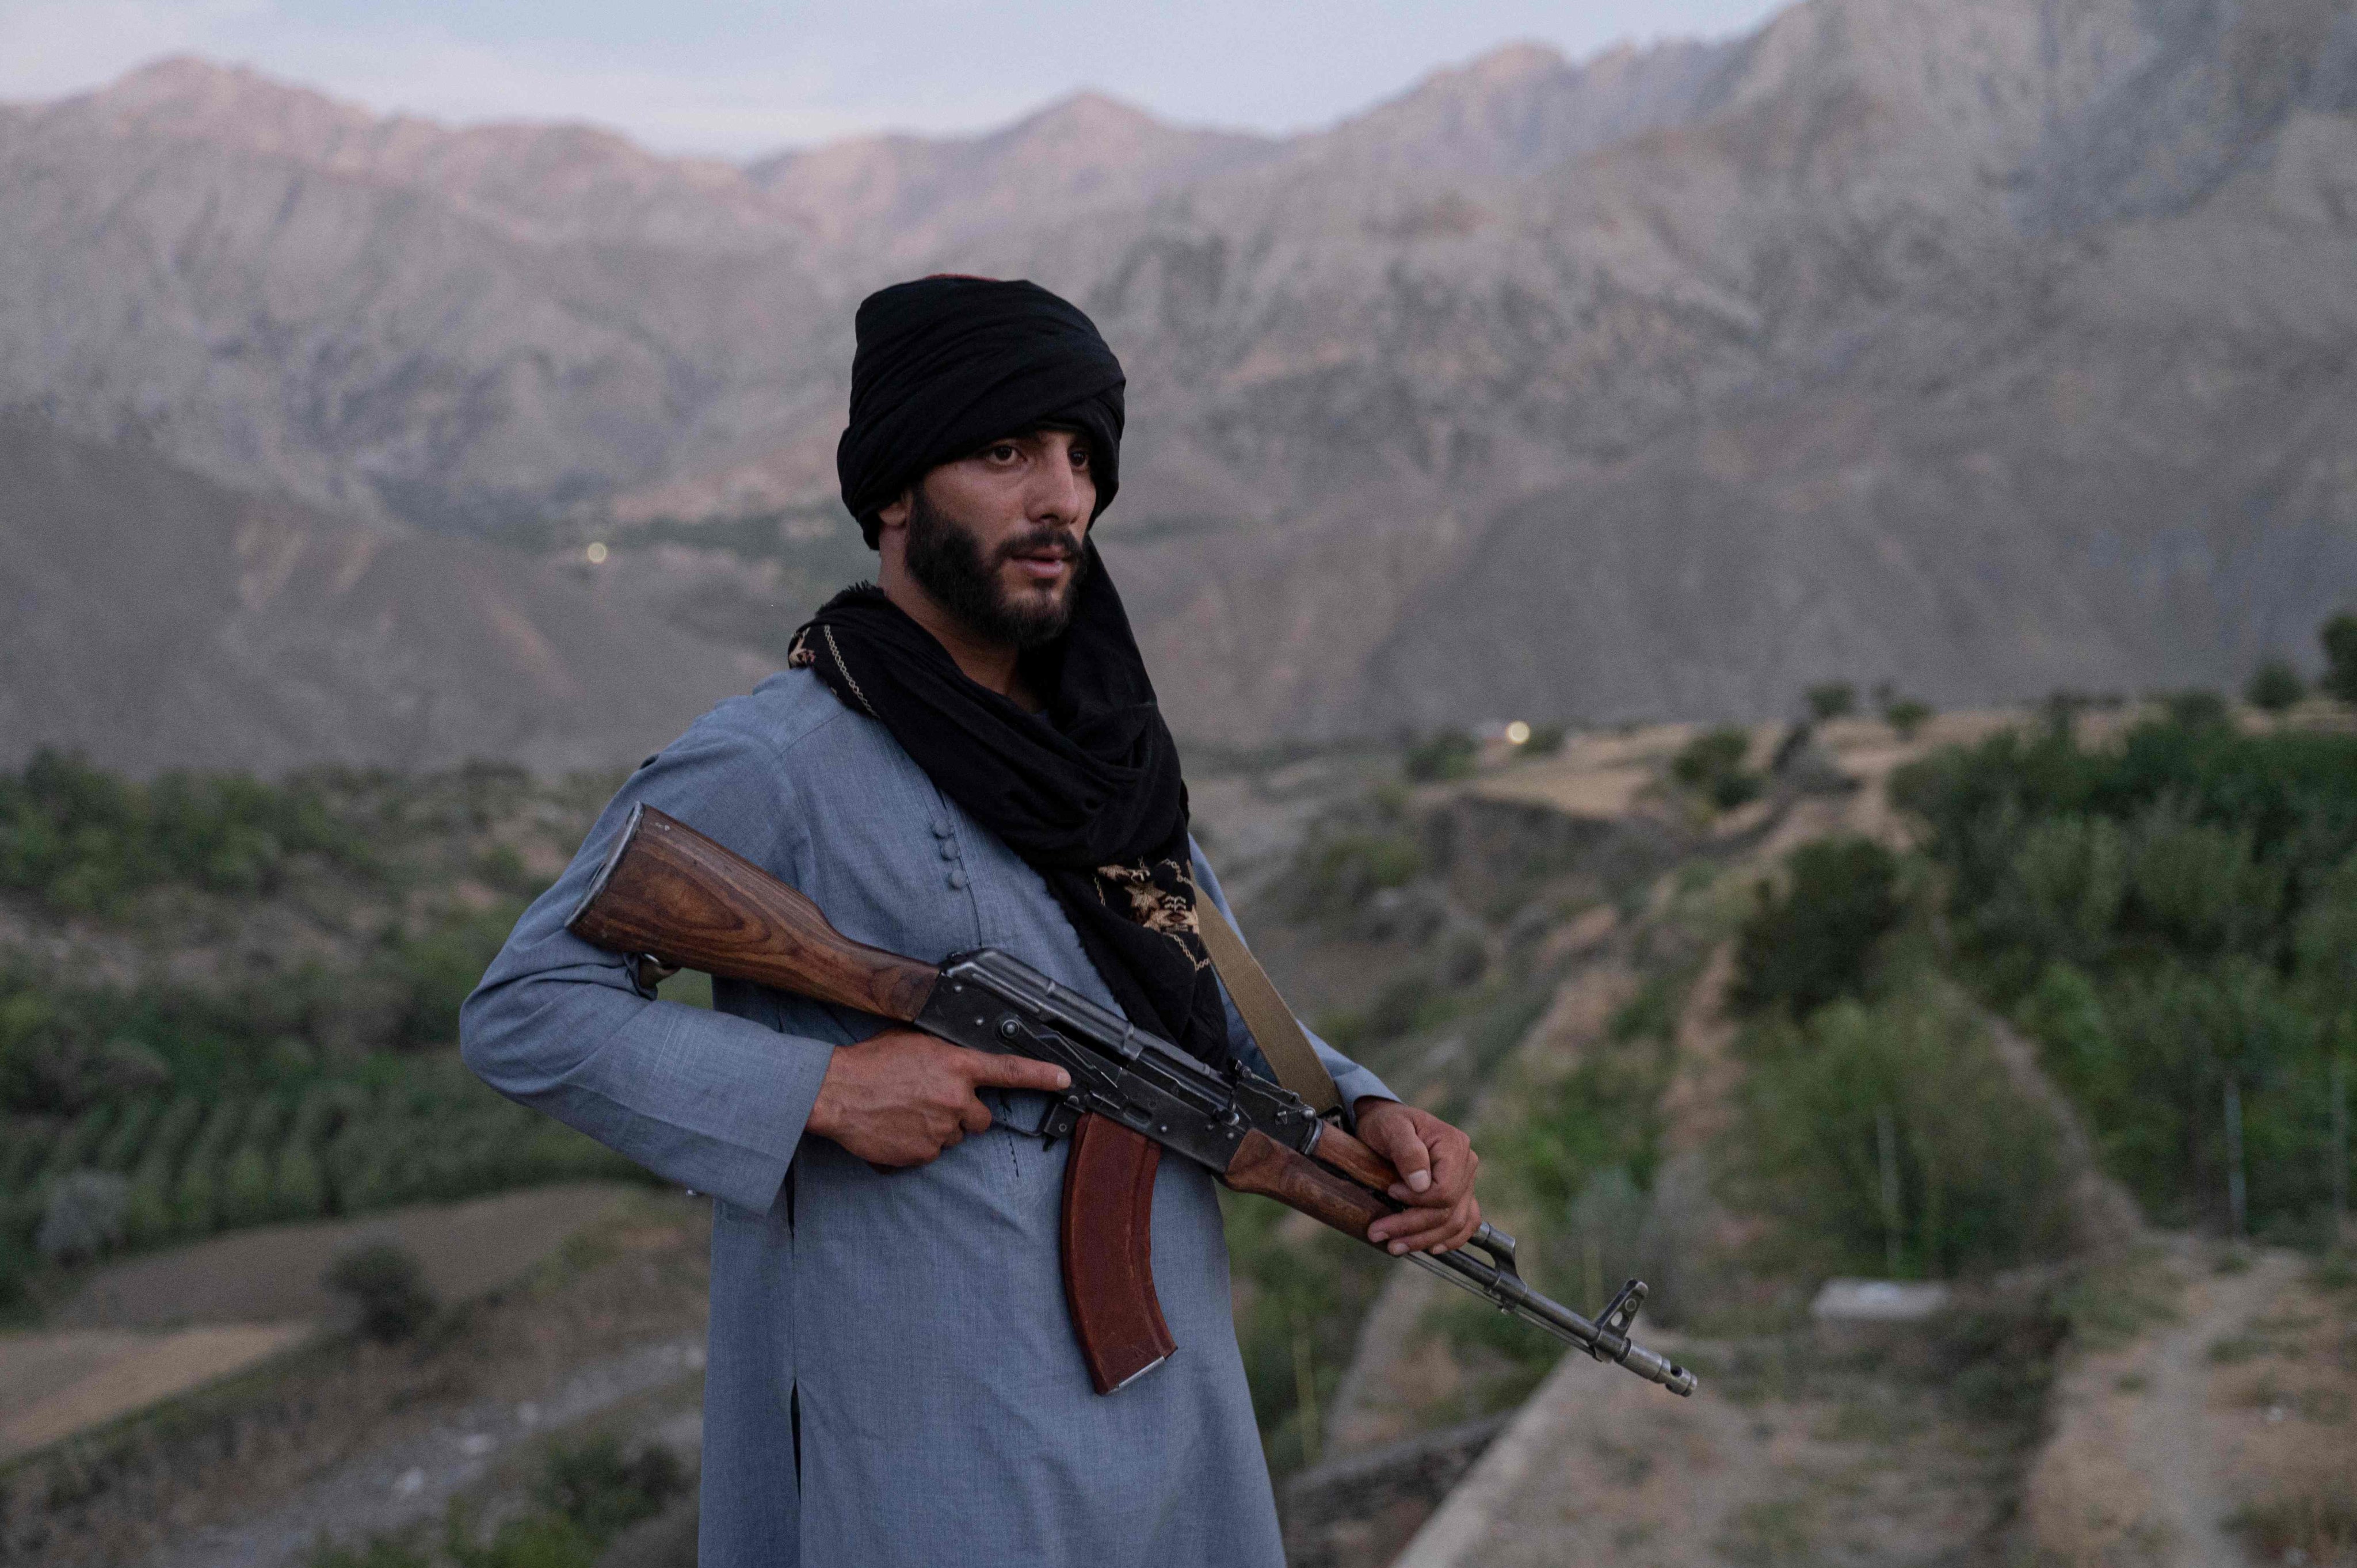 A Taliban fighter keeps a watch in Afghanistan’s Panjshir Province earlier this month. Photo: AFP